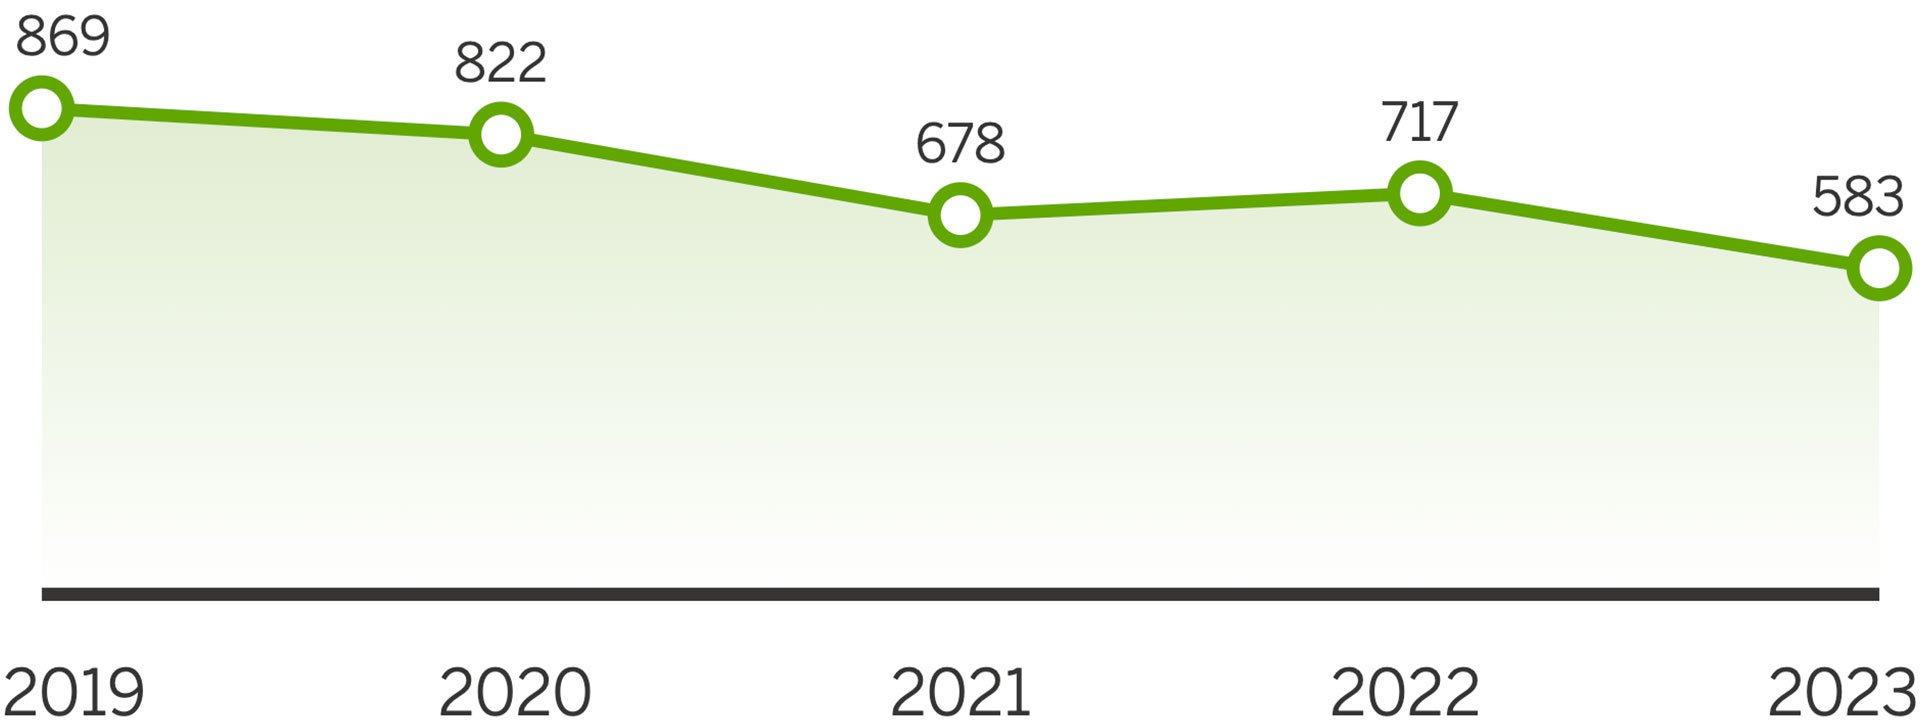 Graph showing fossil fuel use diminishing from 869 to 583 GWh during 2019–2023